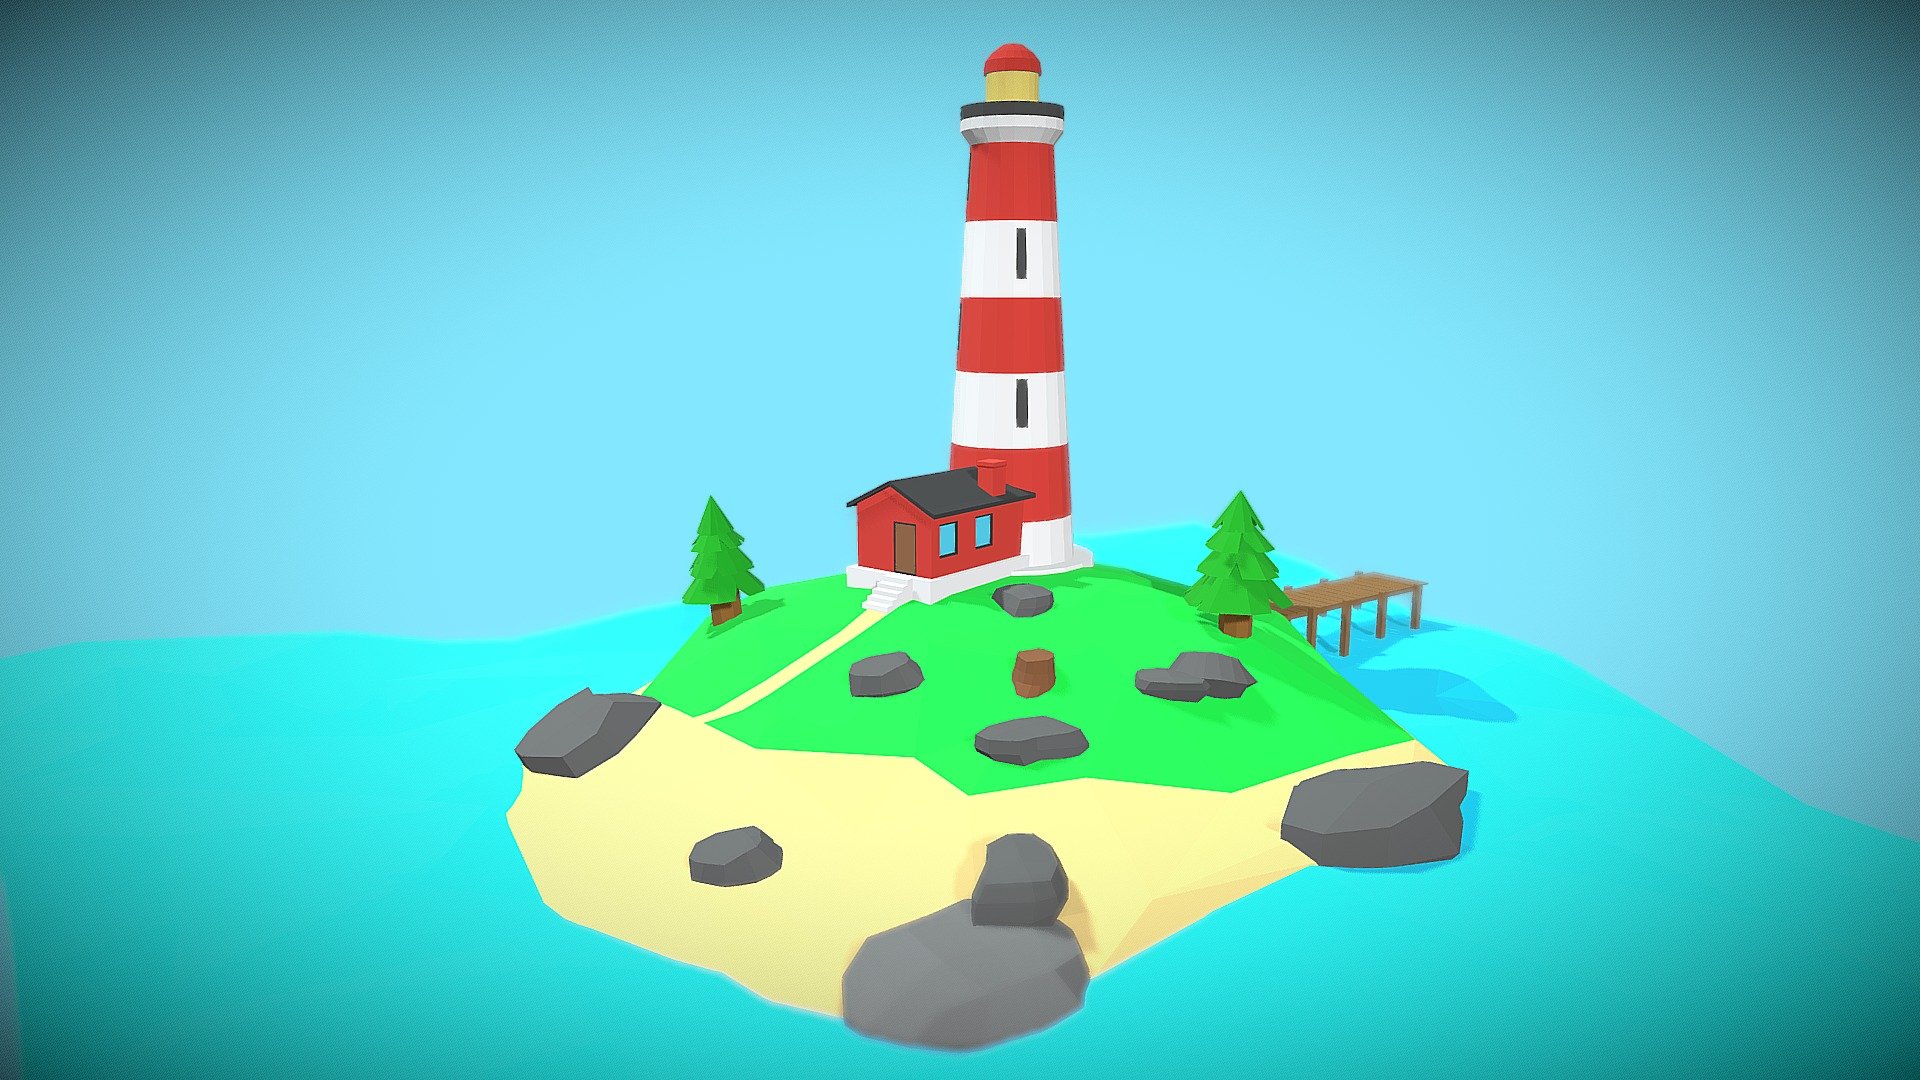 I thought why shouldn't I model a lighthouse and so I modeled it. You could use it for a game or a video if you like 3d model